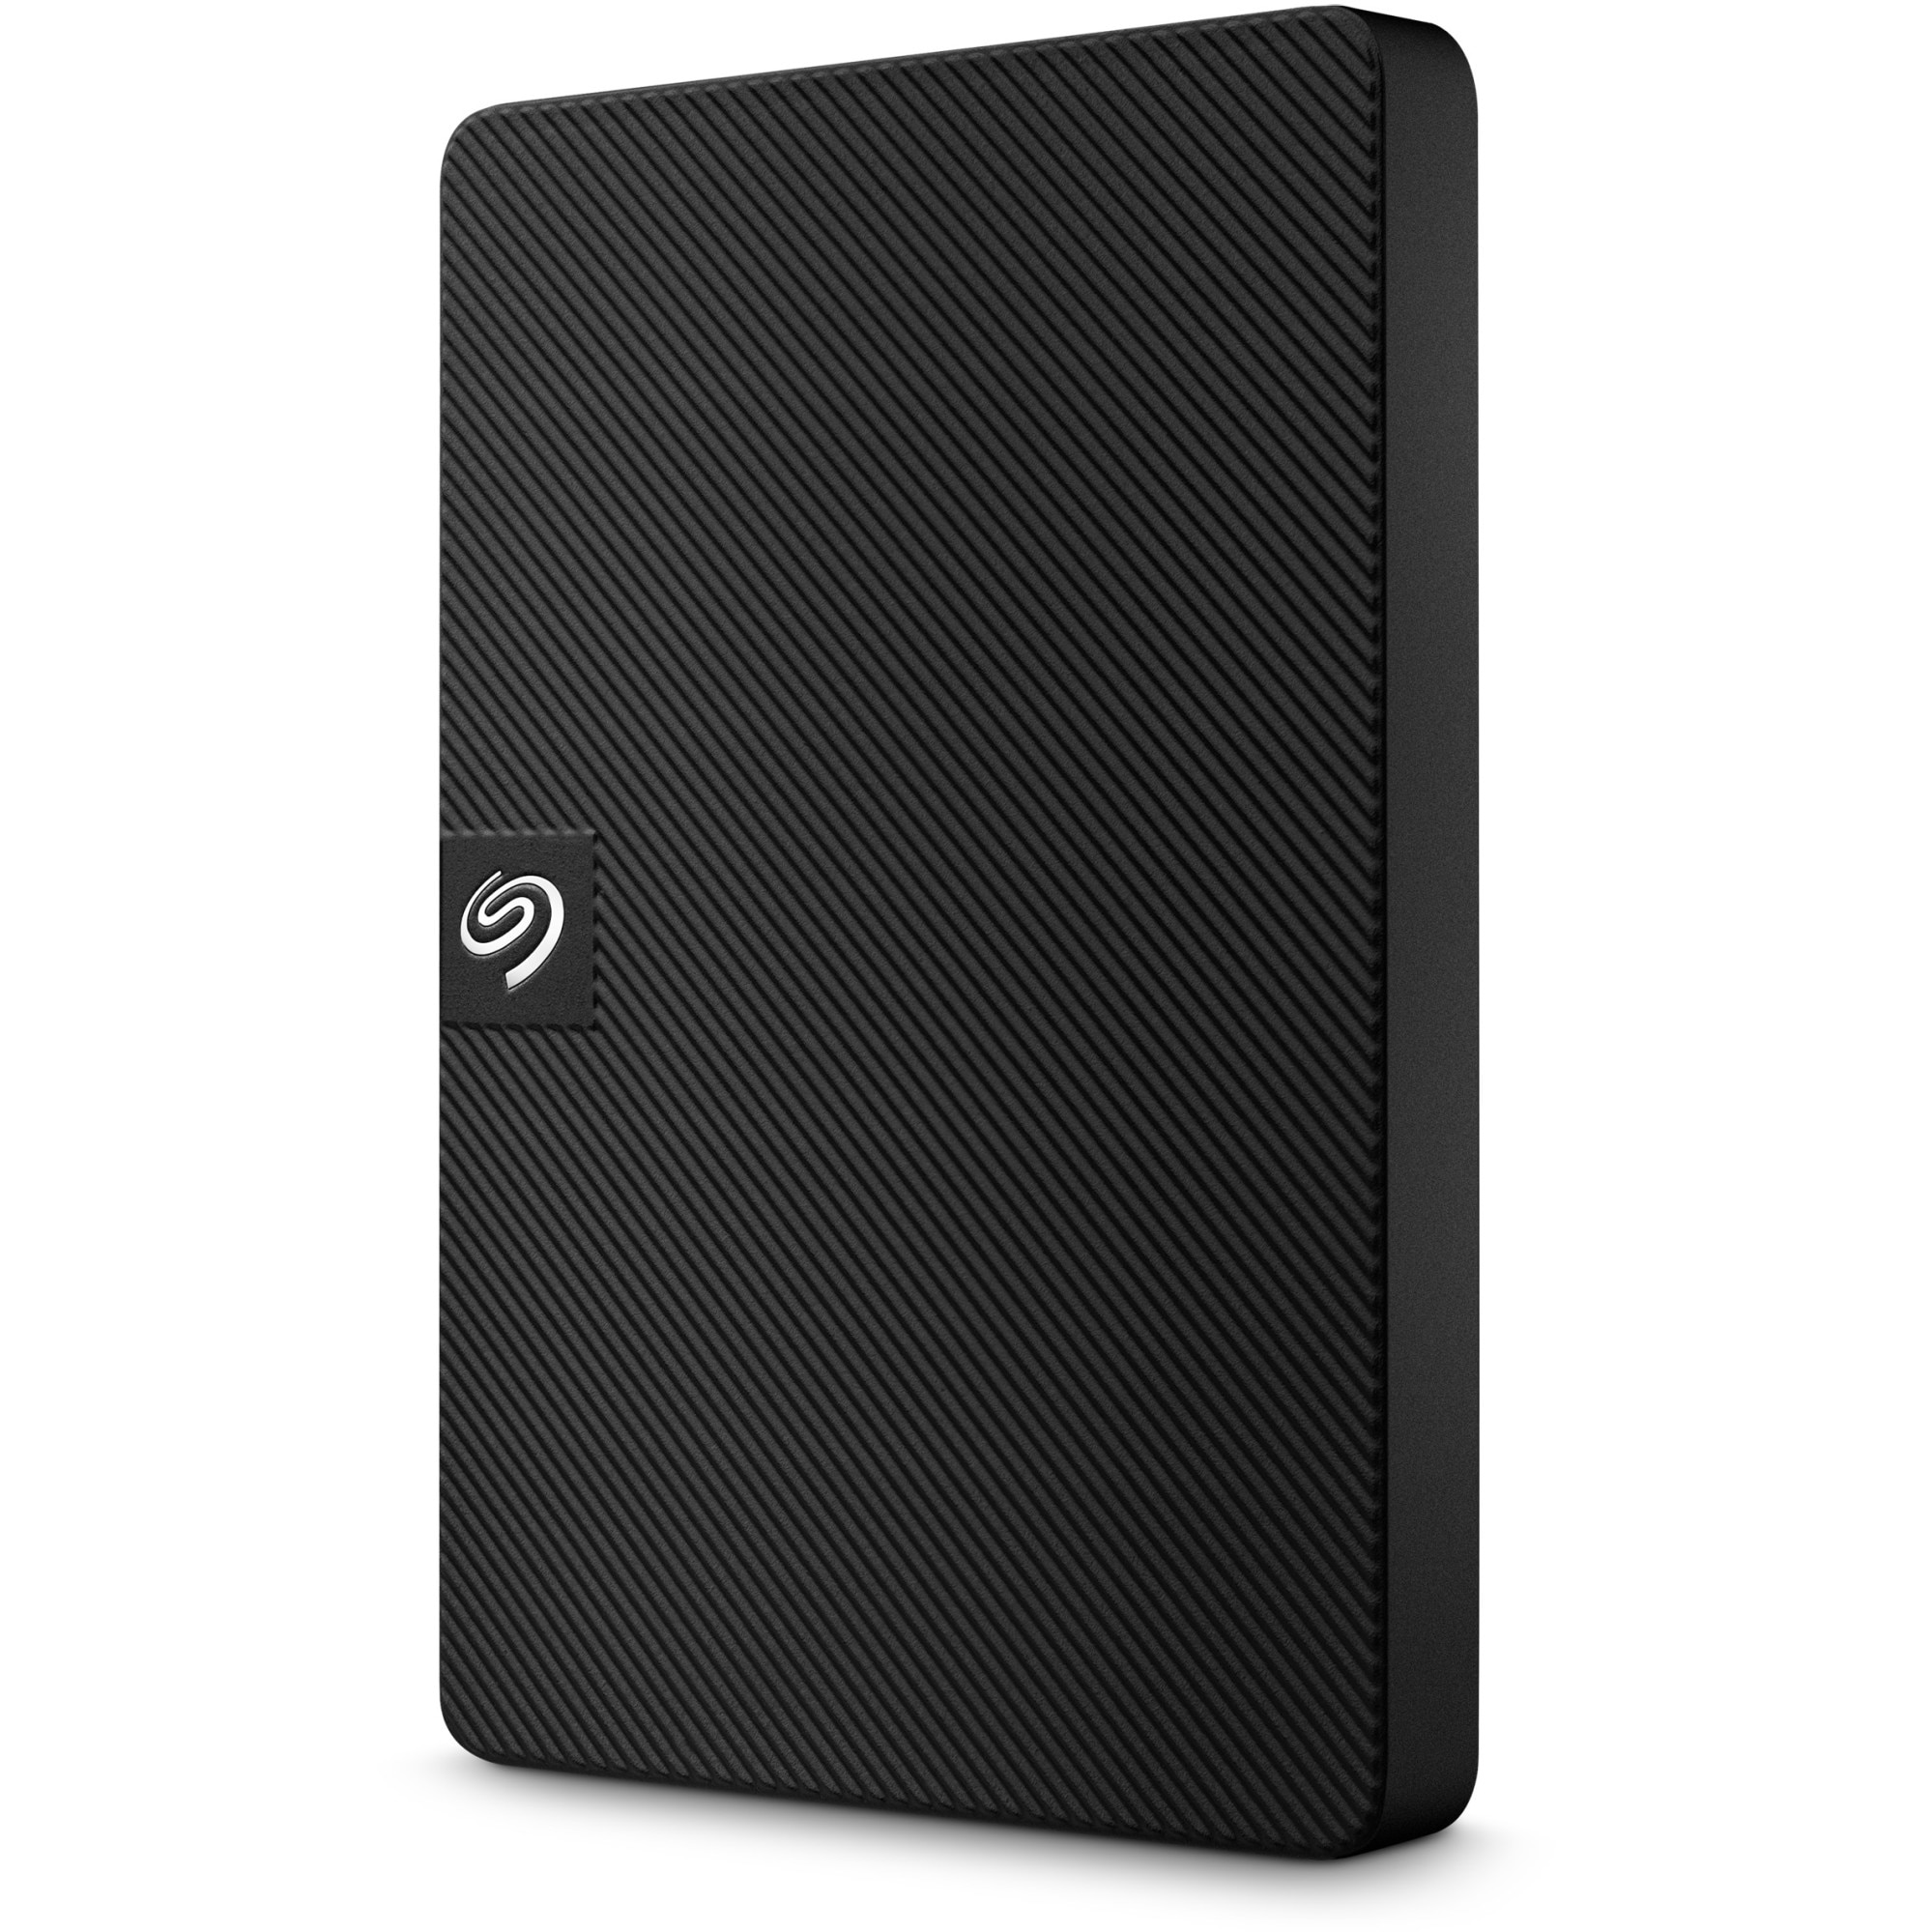 hatred Planned fluid HDD extern Seagate Expansion Portable 2TB, USB 3.0, Negru - eMAG.ro